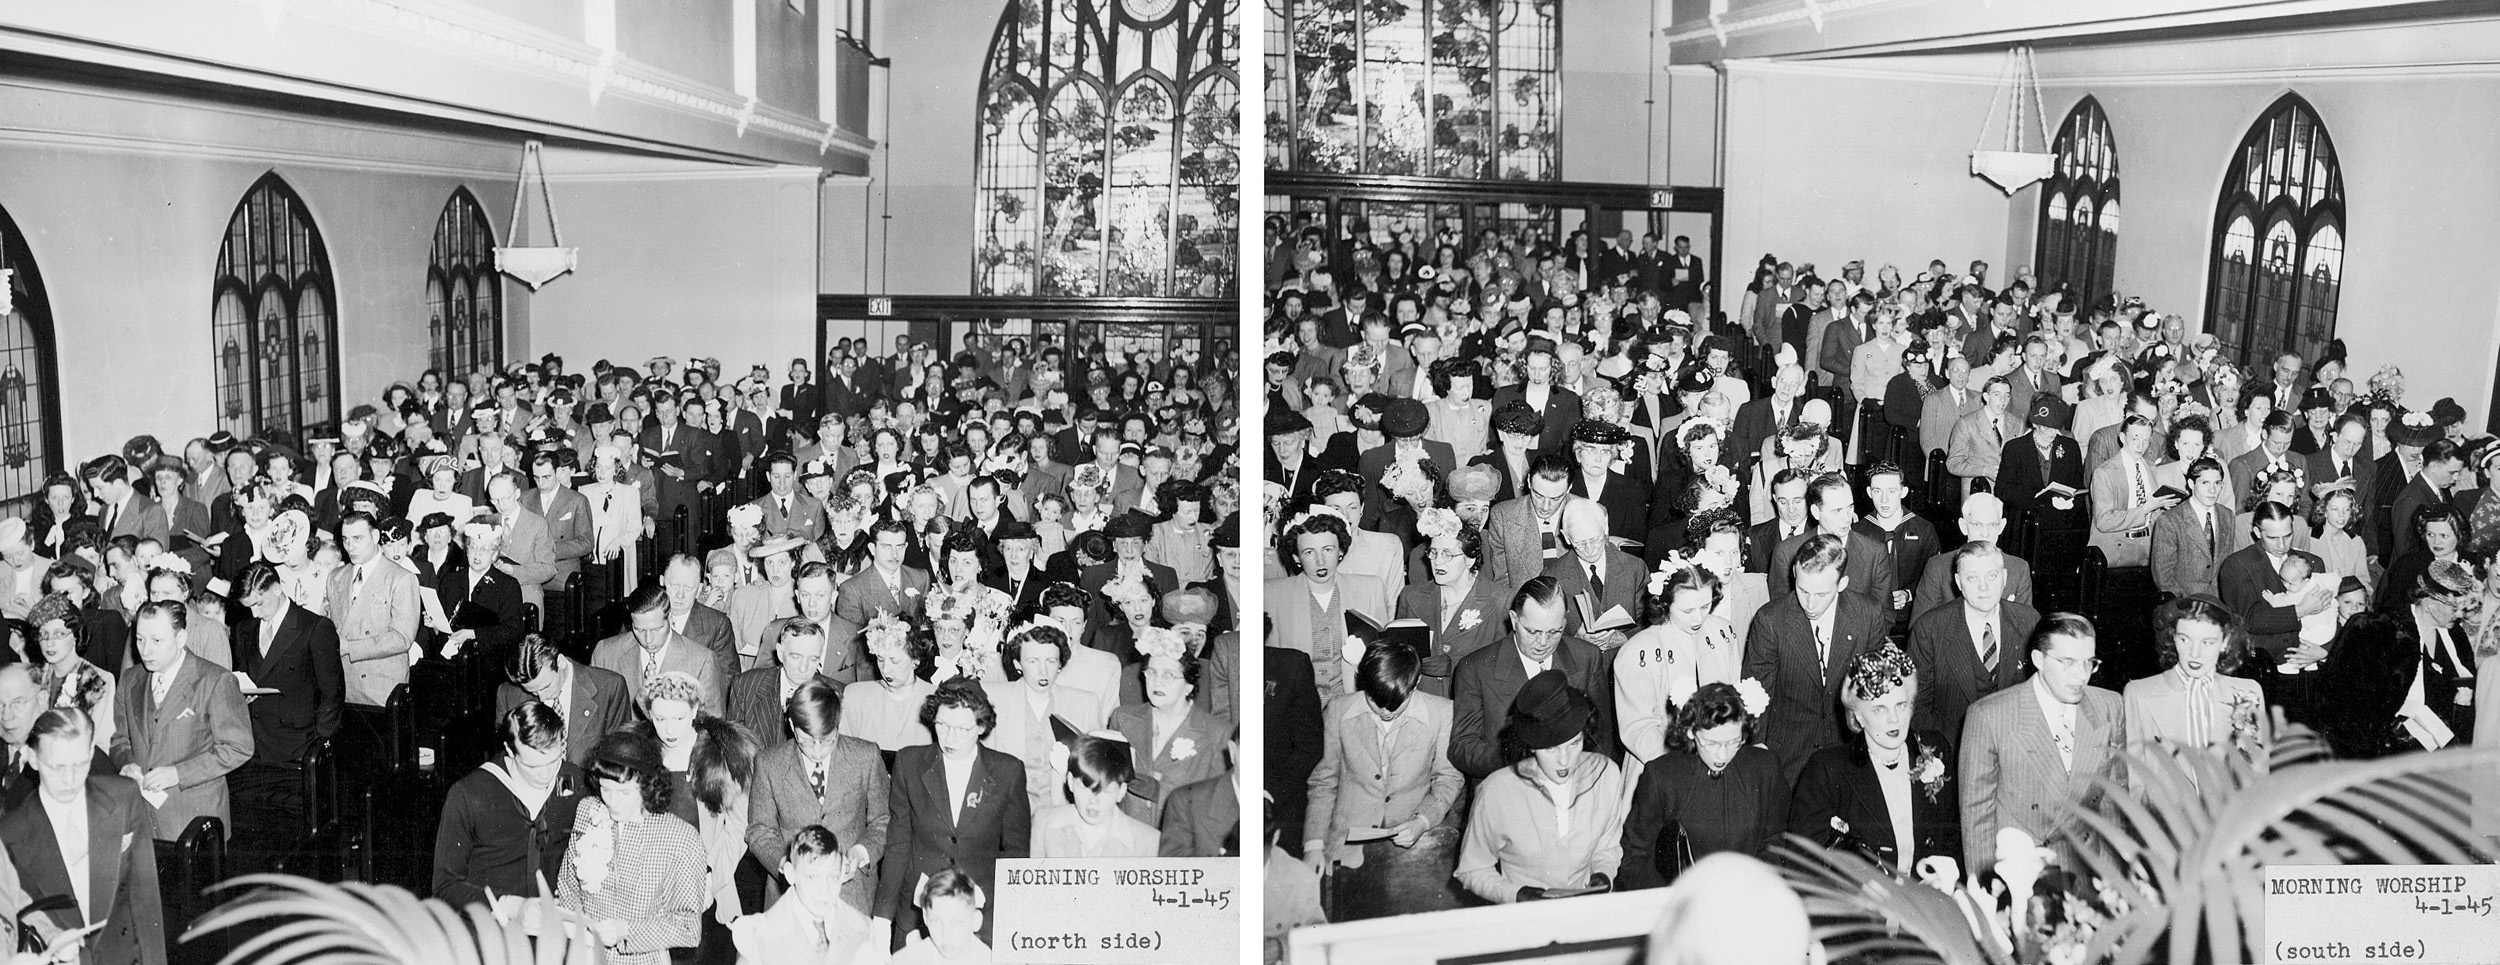 Park Manor Church, Chicago, Easter Sunday, April 1, 1945. My father, Rev. S. Lawrence Johnson, was pastor of this church. View full size.